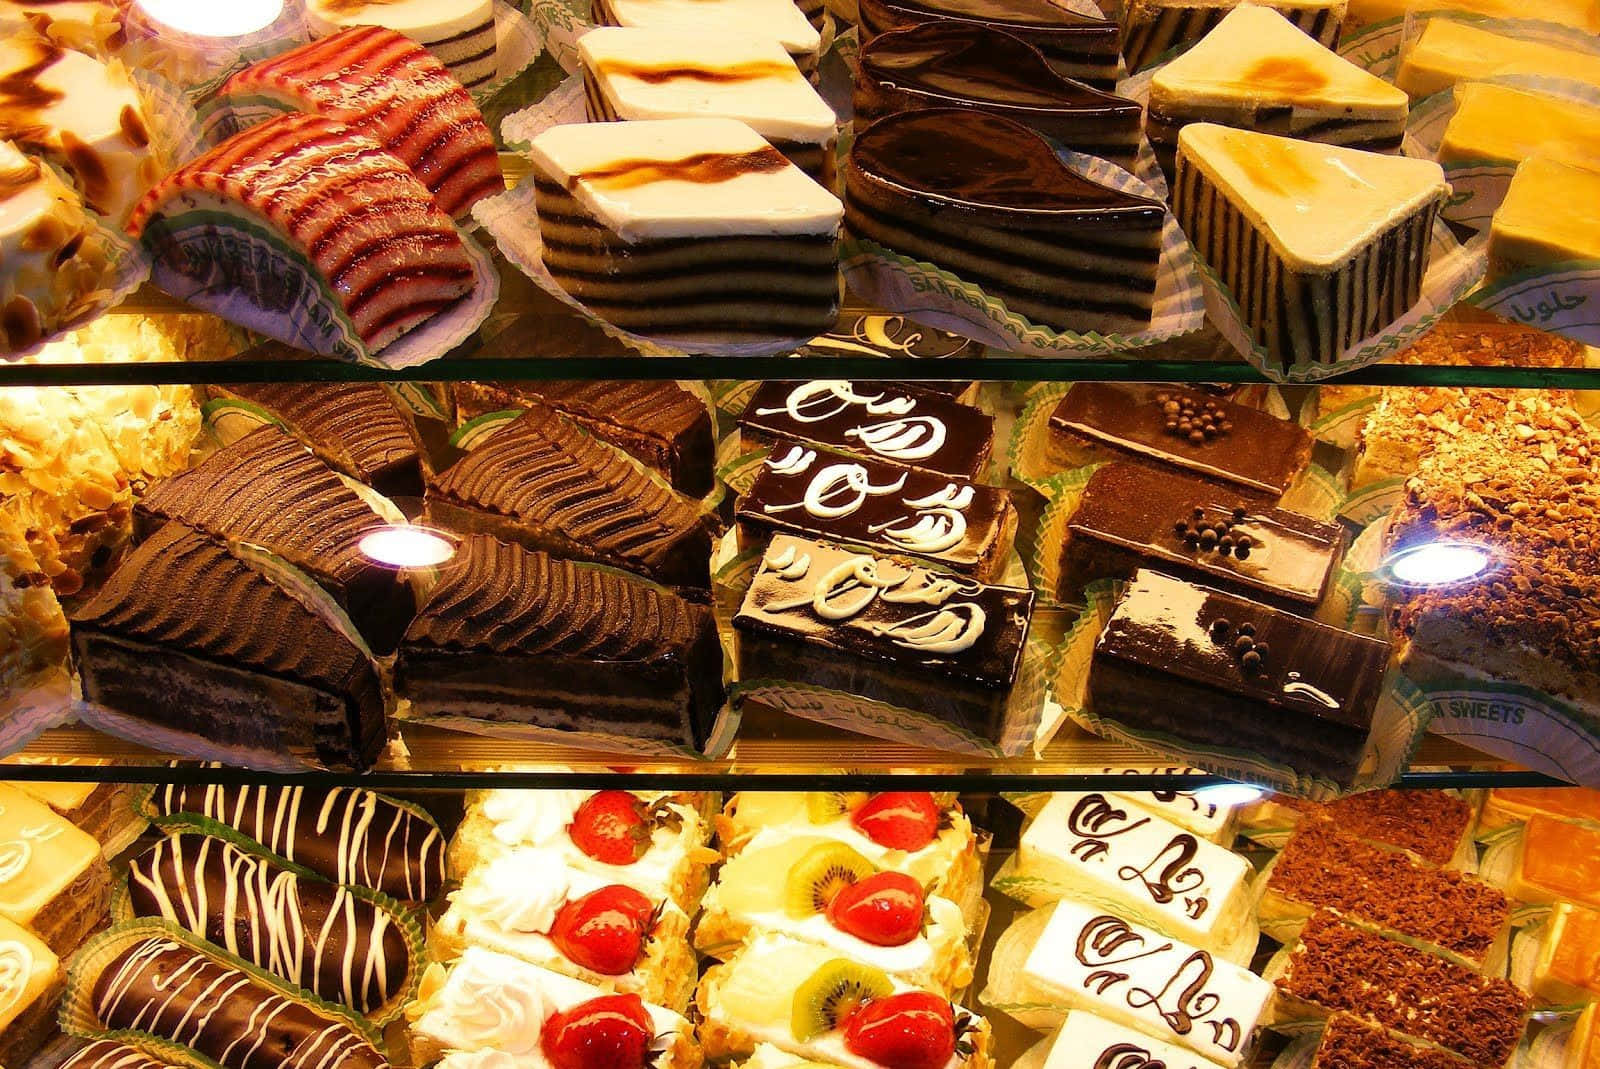 Celebrate with delicious pastry delights